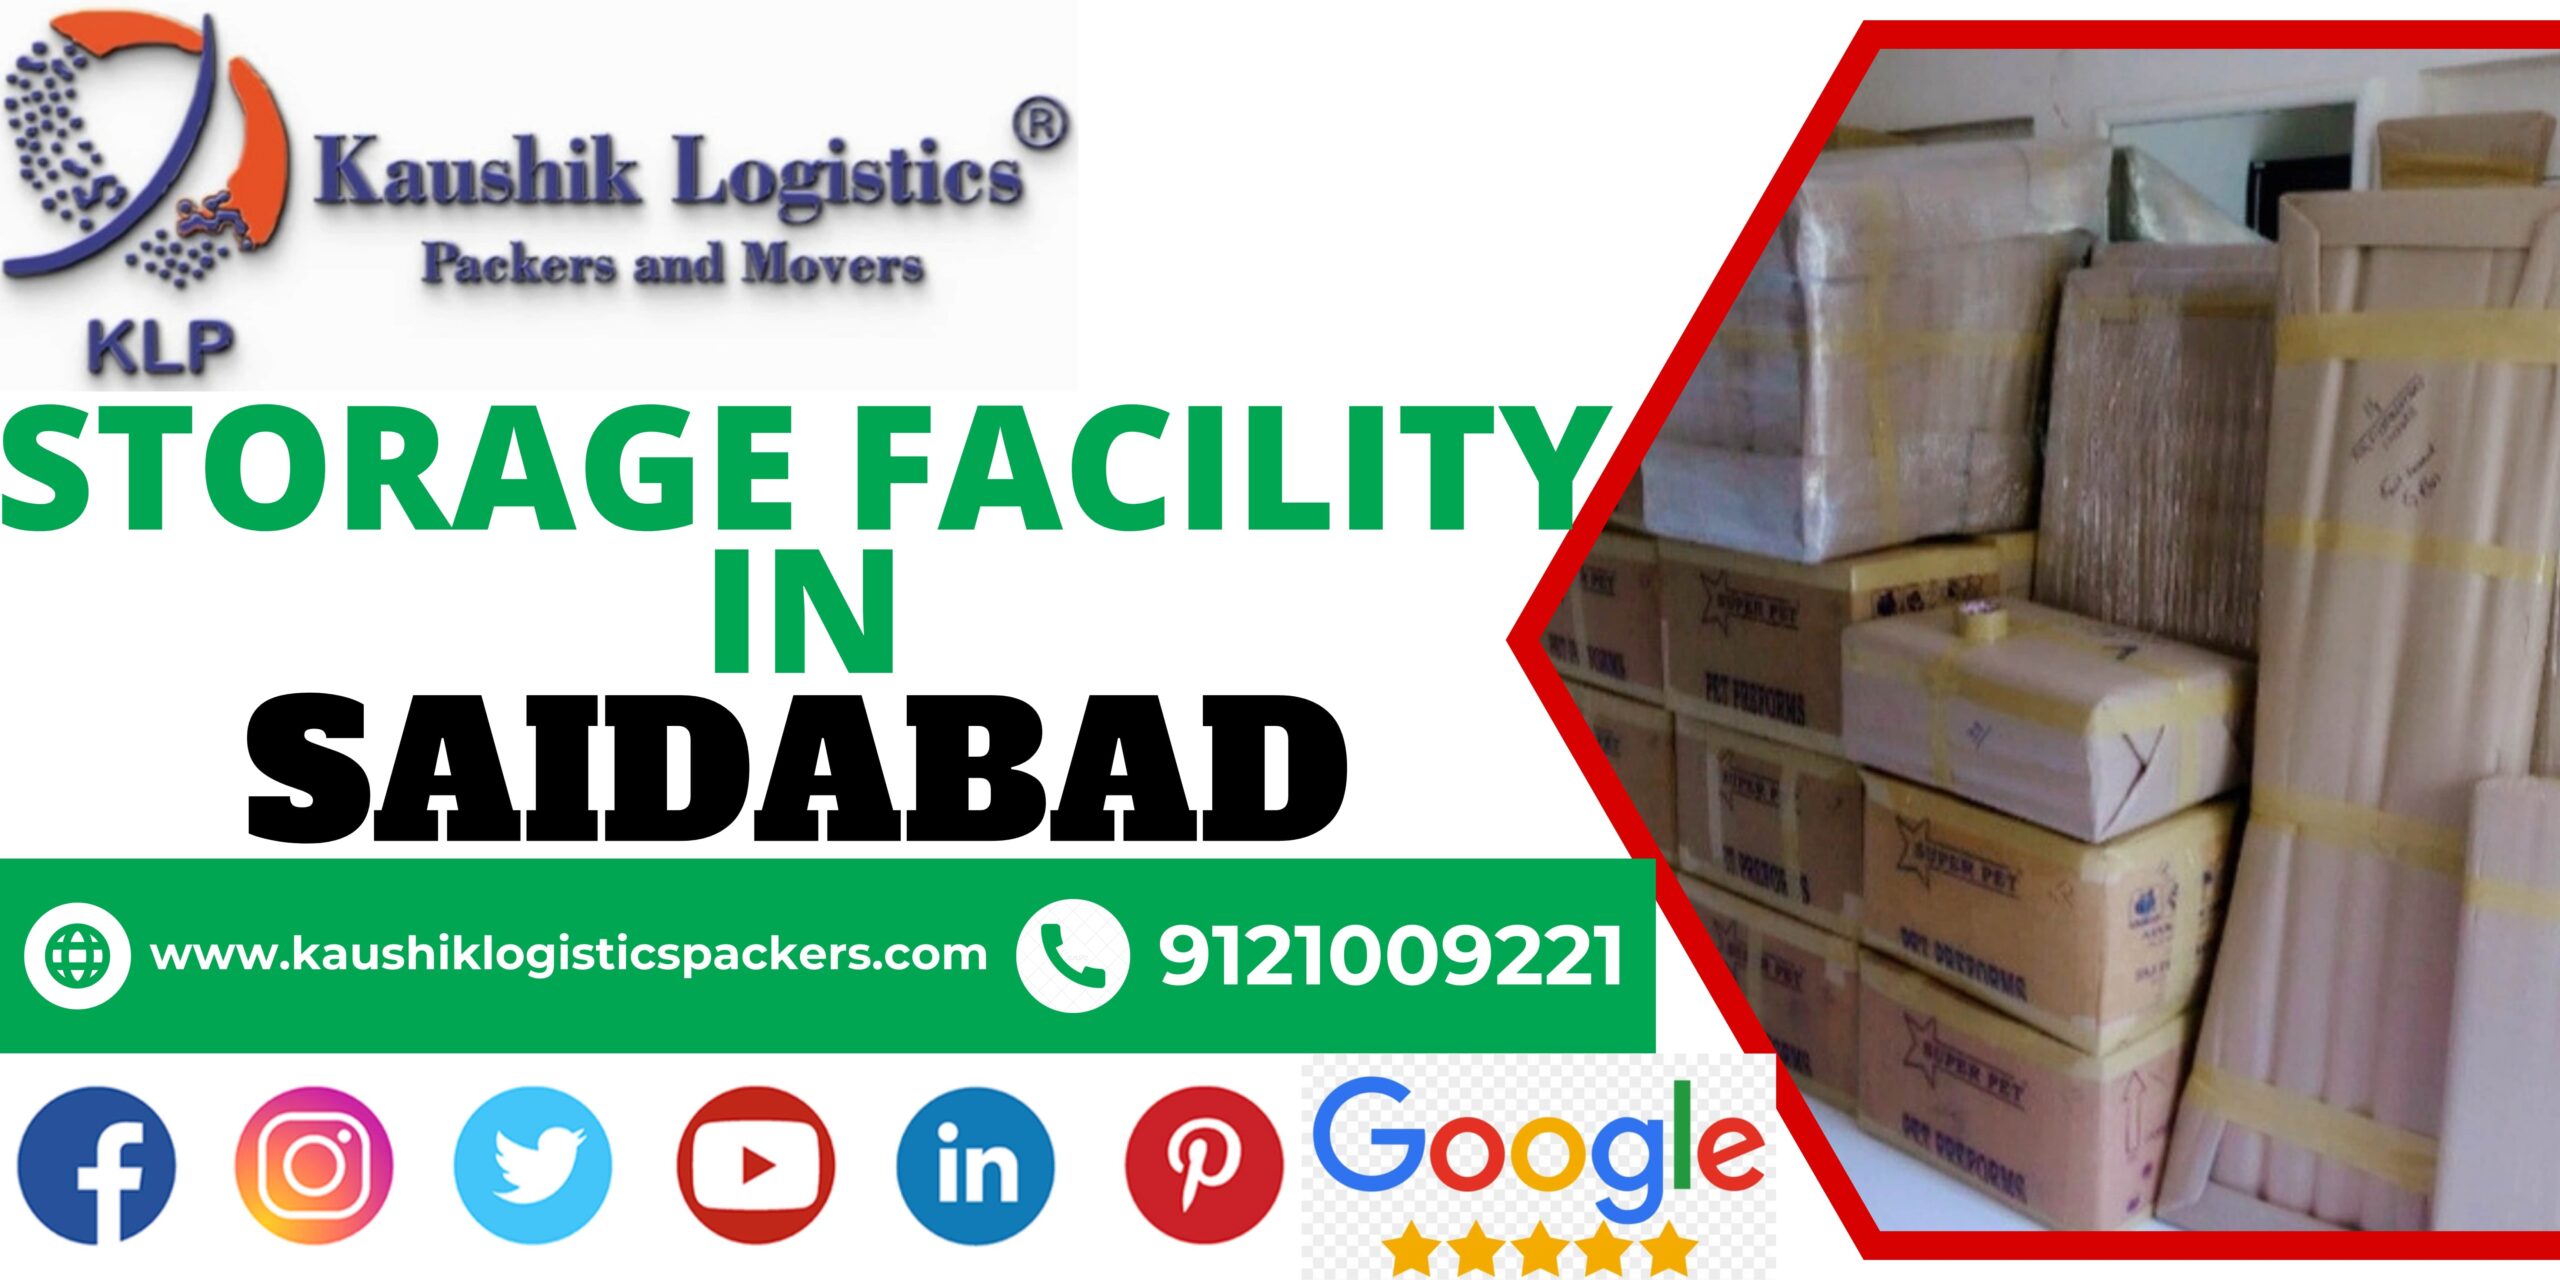 Packers and Movers In Saidabad